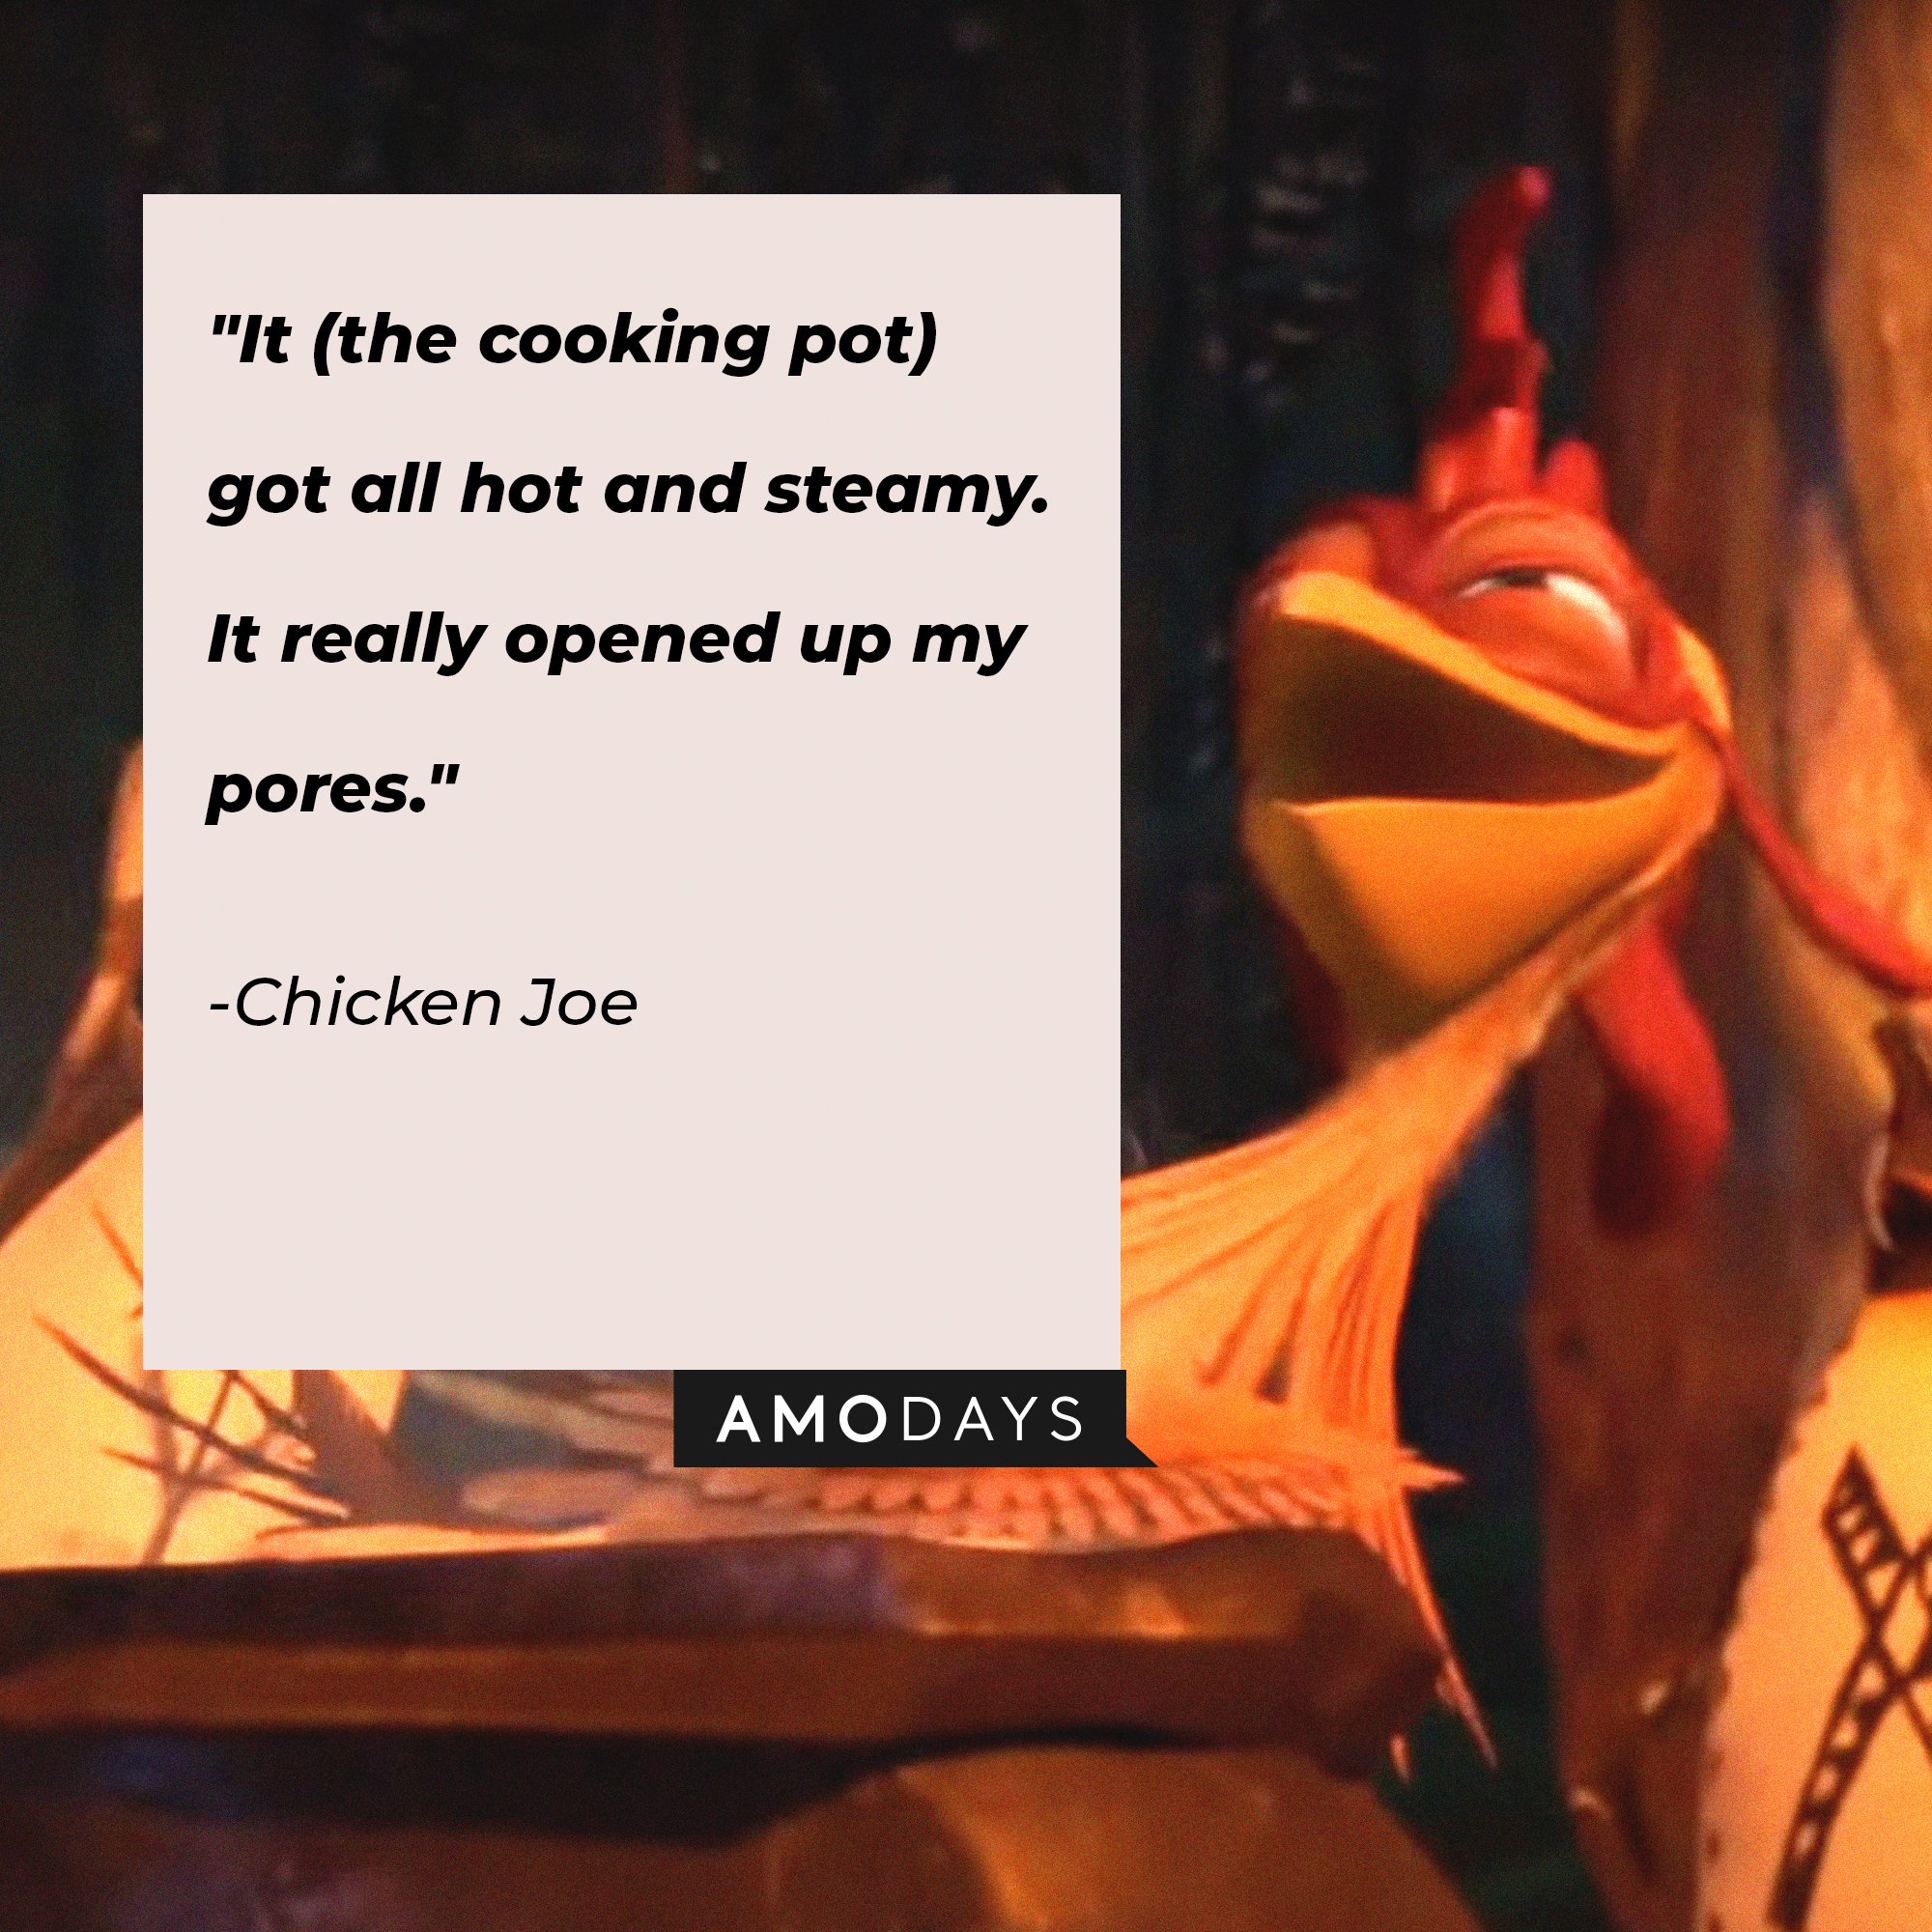 Chicken Joe's quote: "It (the cooking pot) got all hot and steamy. It really opened up my pores." | Image: AmoDays